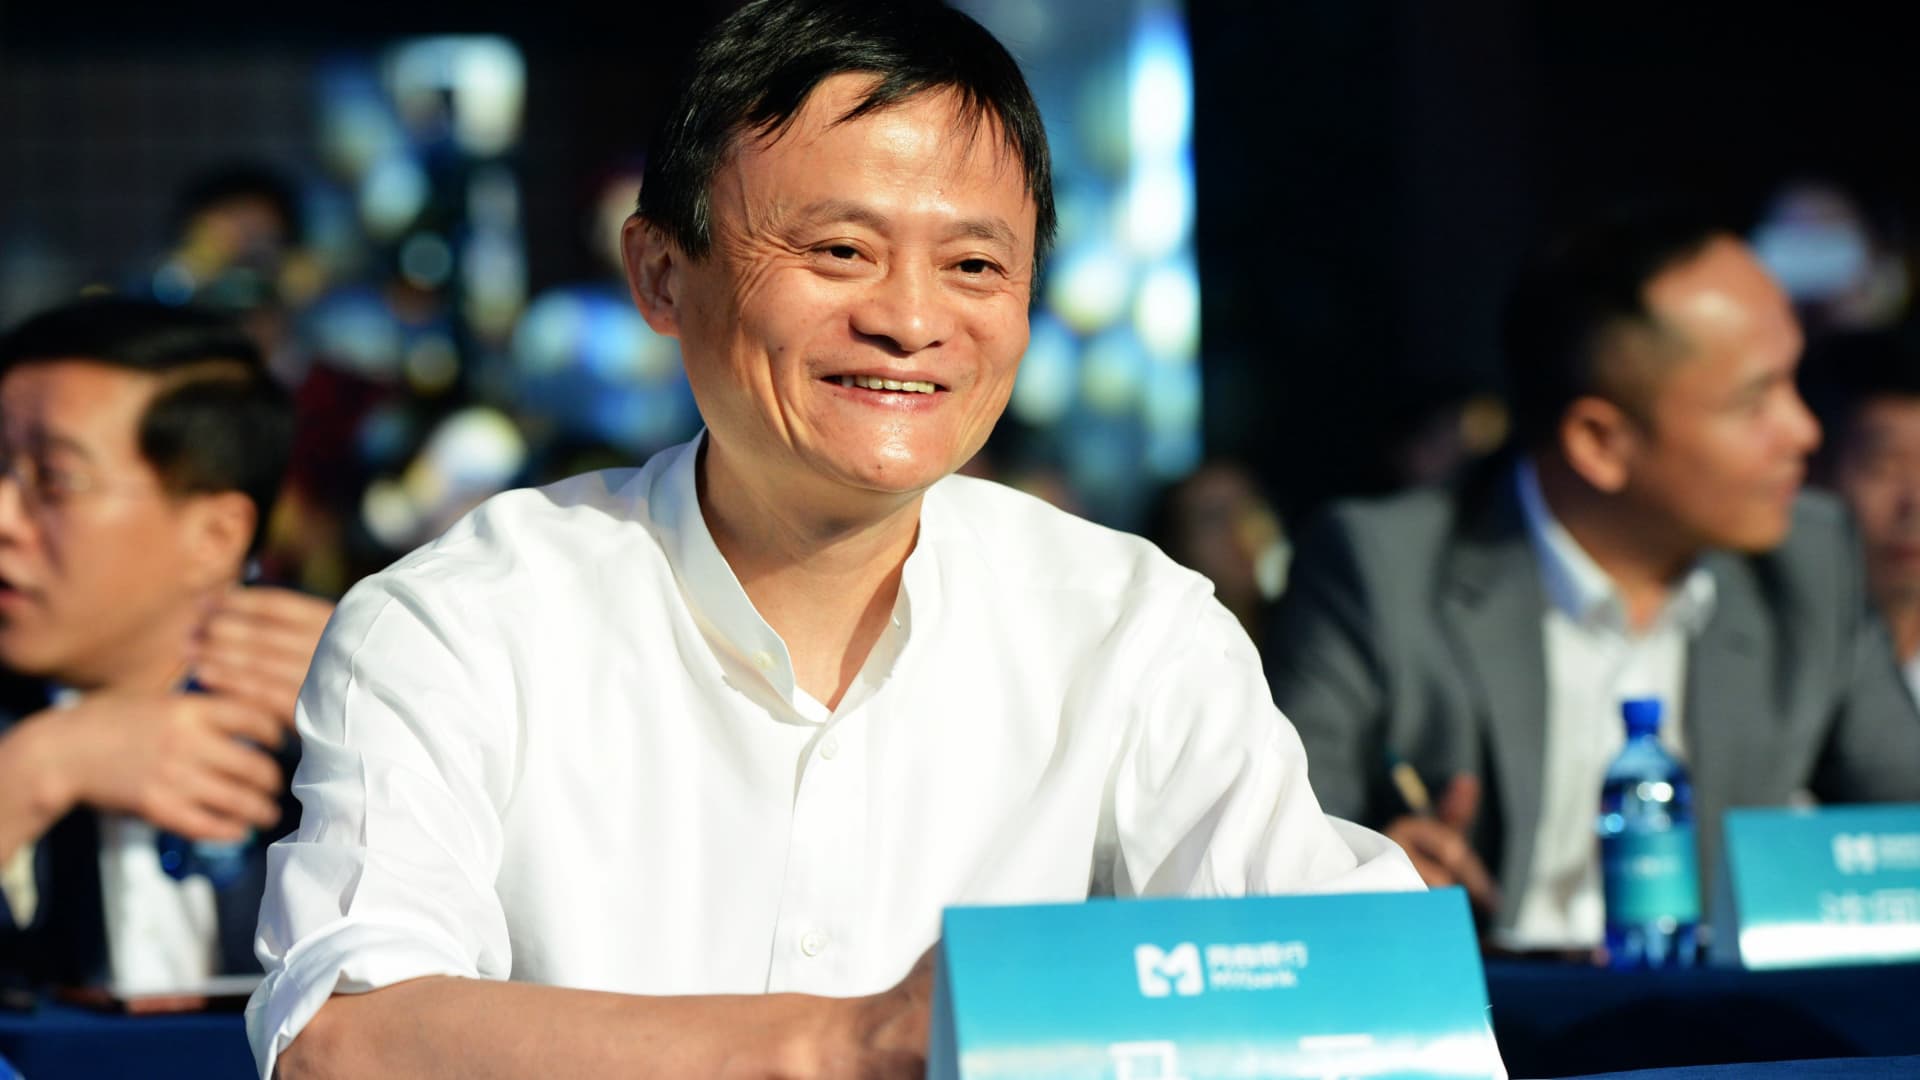 Alibaba founder Jack Ma is ‘alive’ and ‘gratified,’ top exec says after China’s tech crackdown